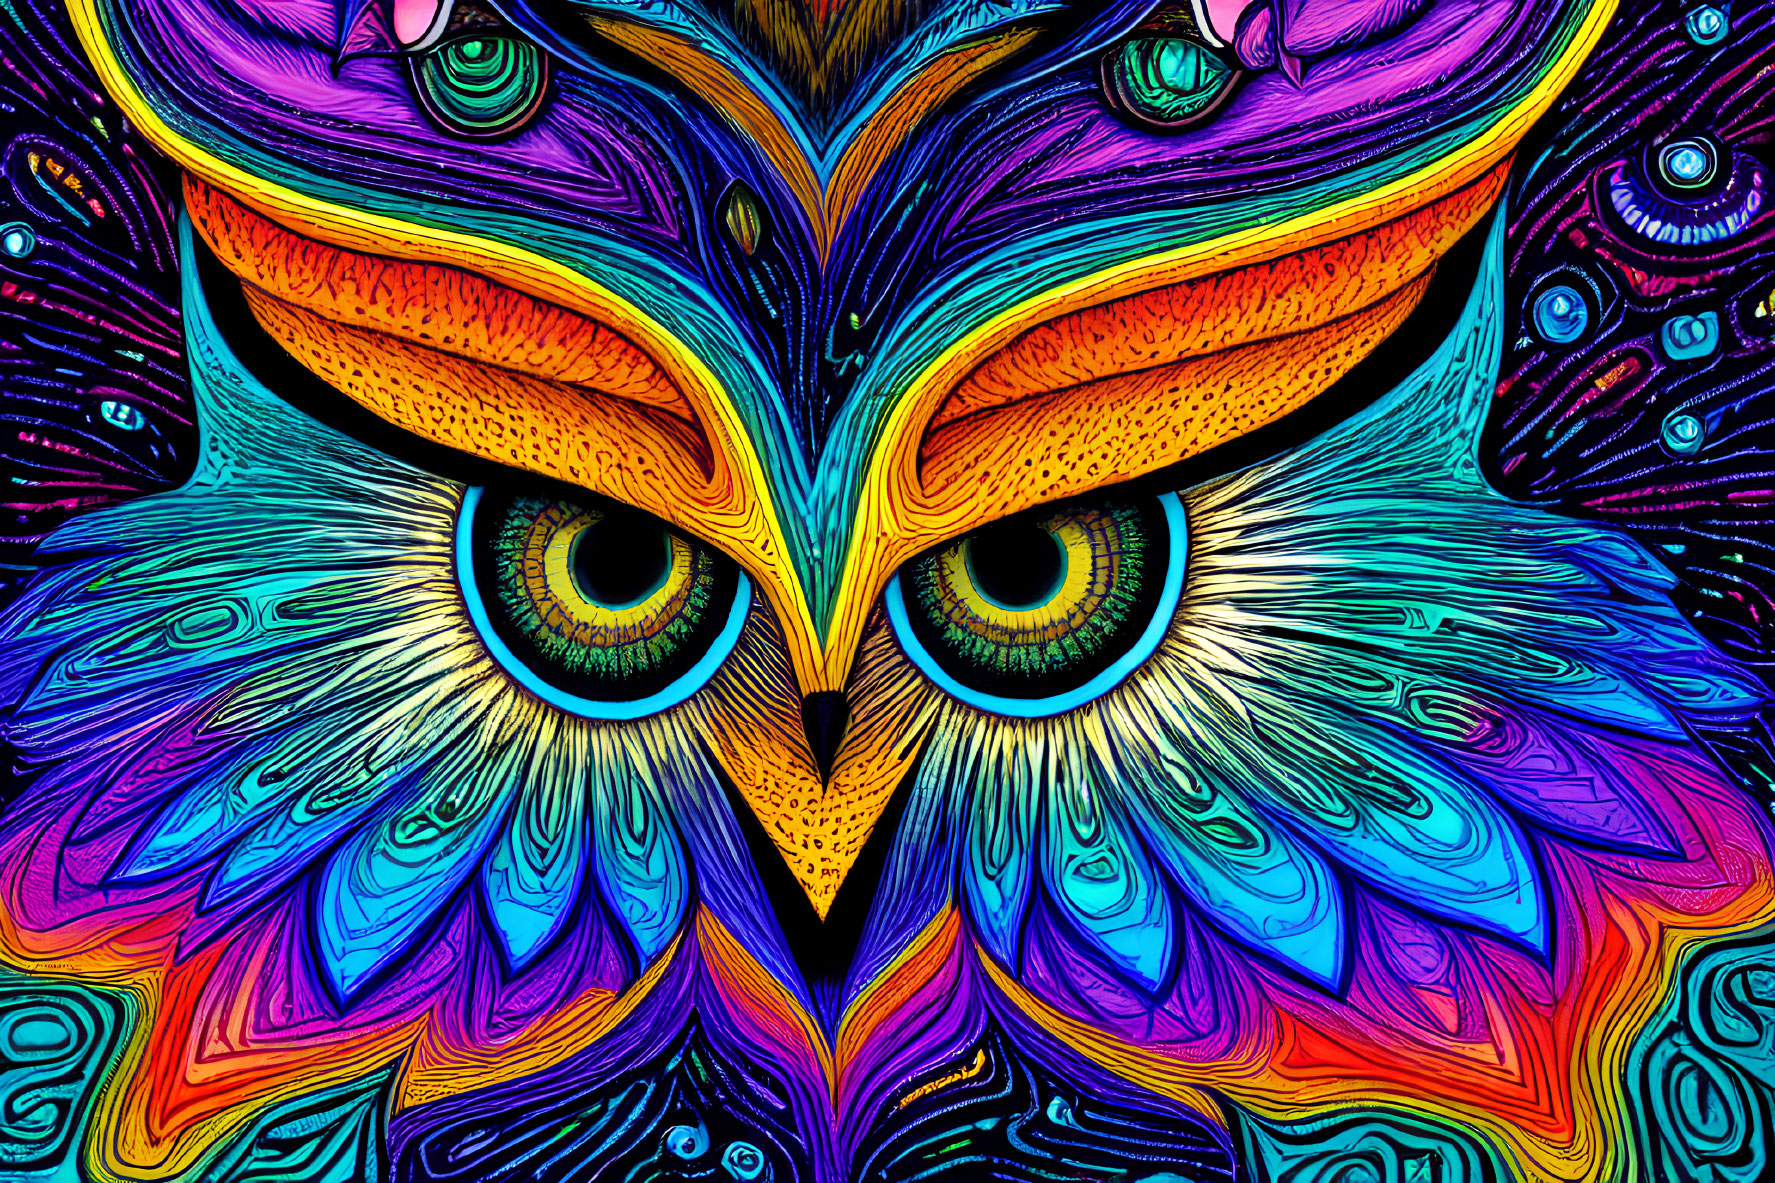 Colorful Owl Artwork with Psychedelic Palette & Detailed Patterns